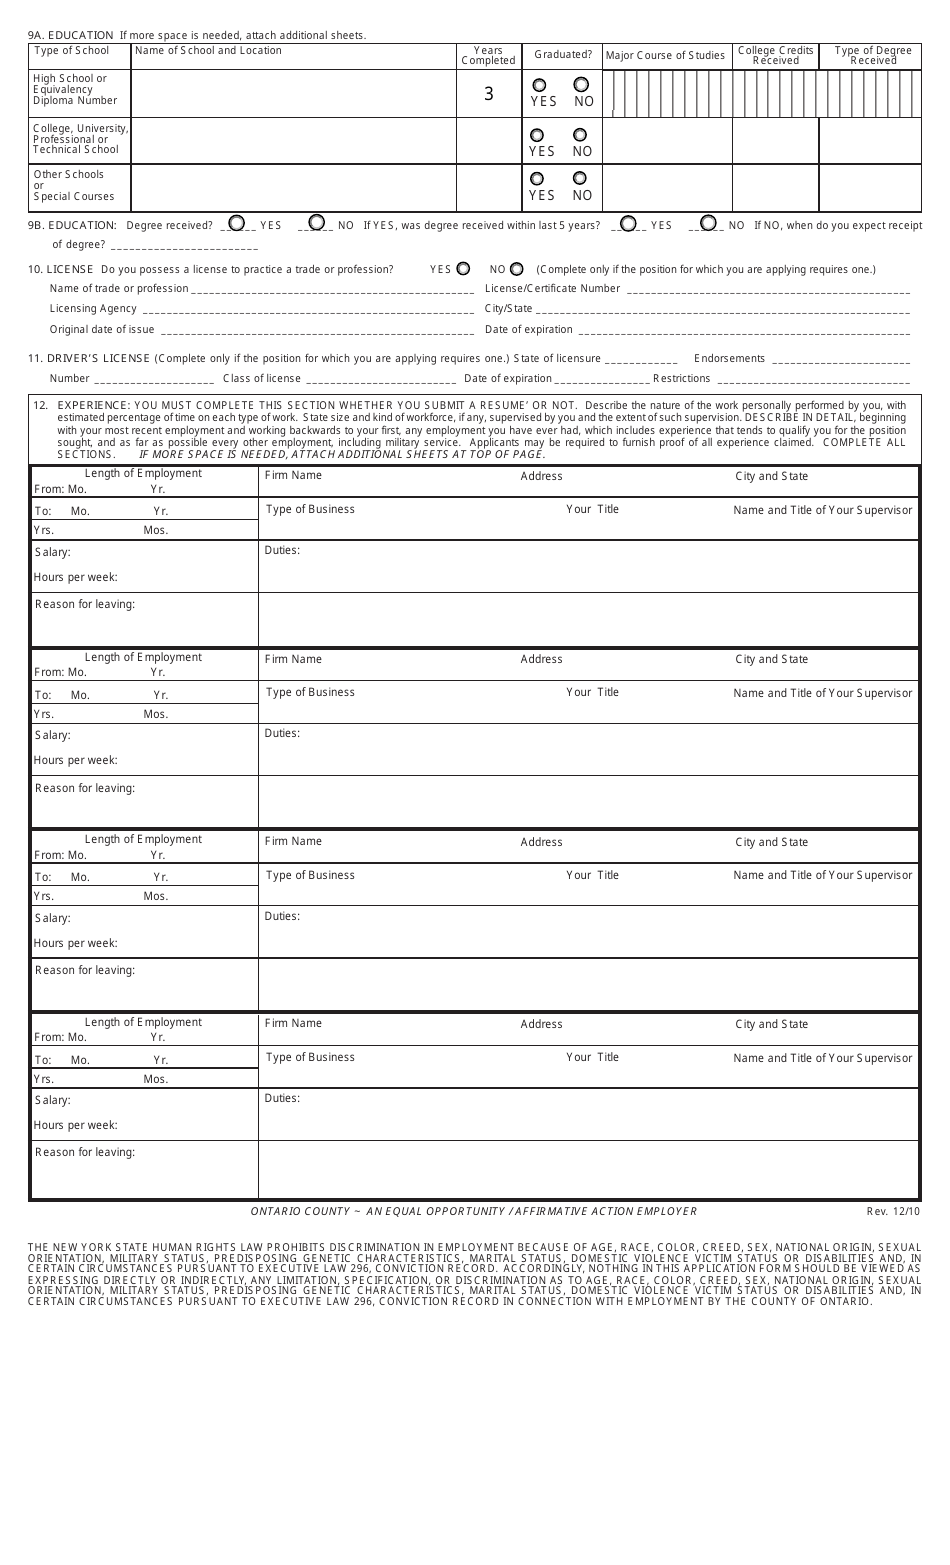 Ontario County New York Application Form For Examination Or Employment Fill Out Sign Online 0593